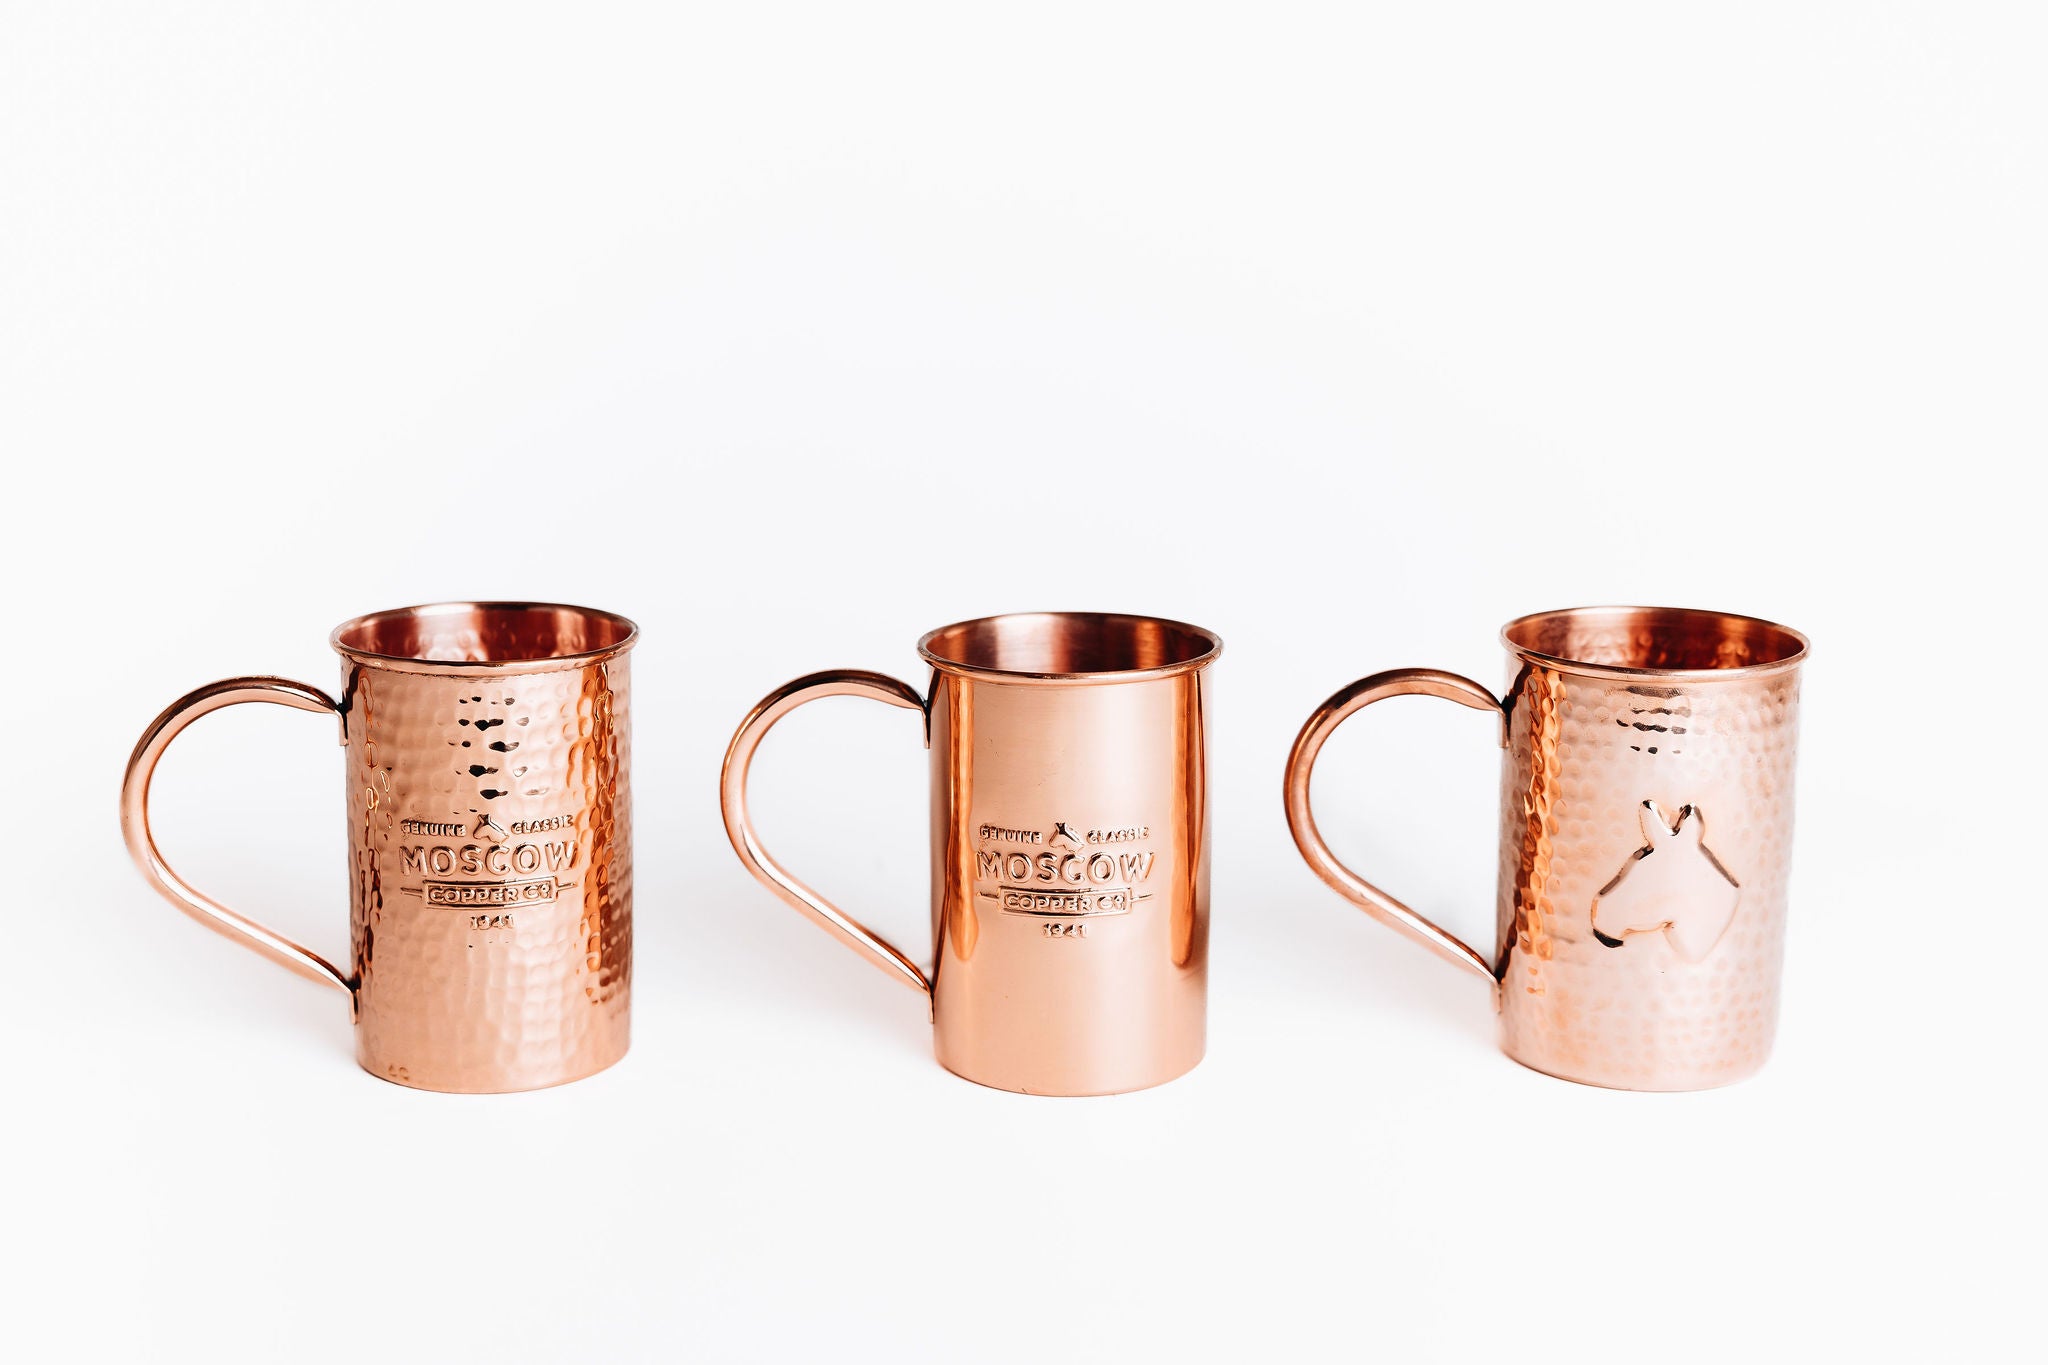 Copper Studio Moscow Mule Copper Mugs Set Of 4 100% Handcrafted